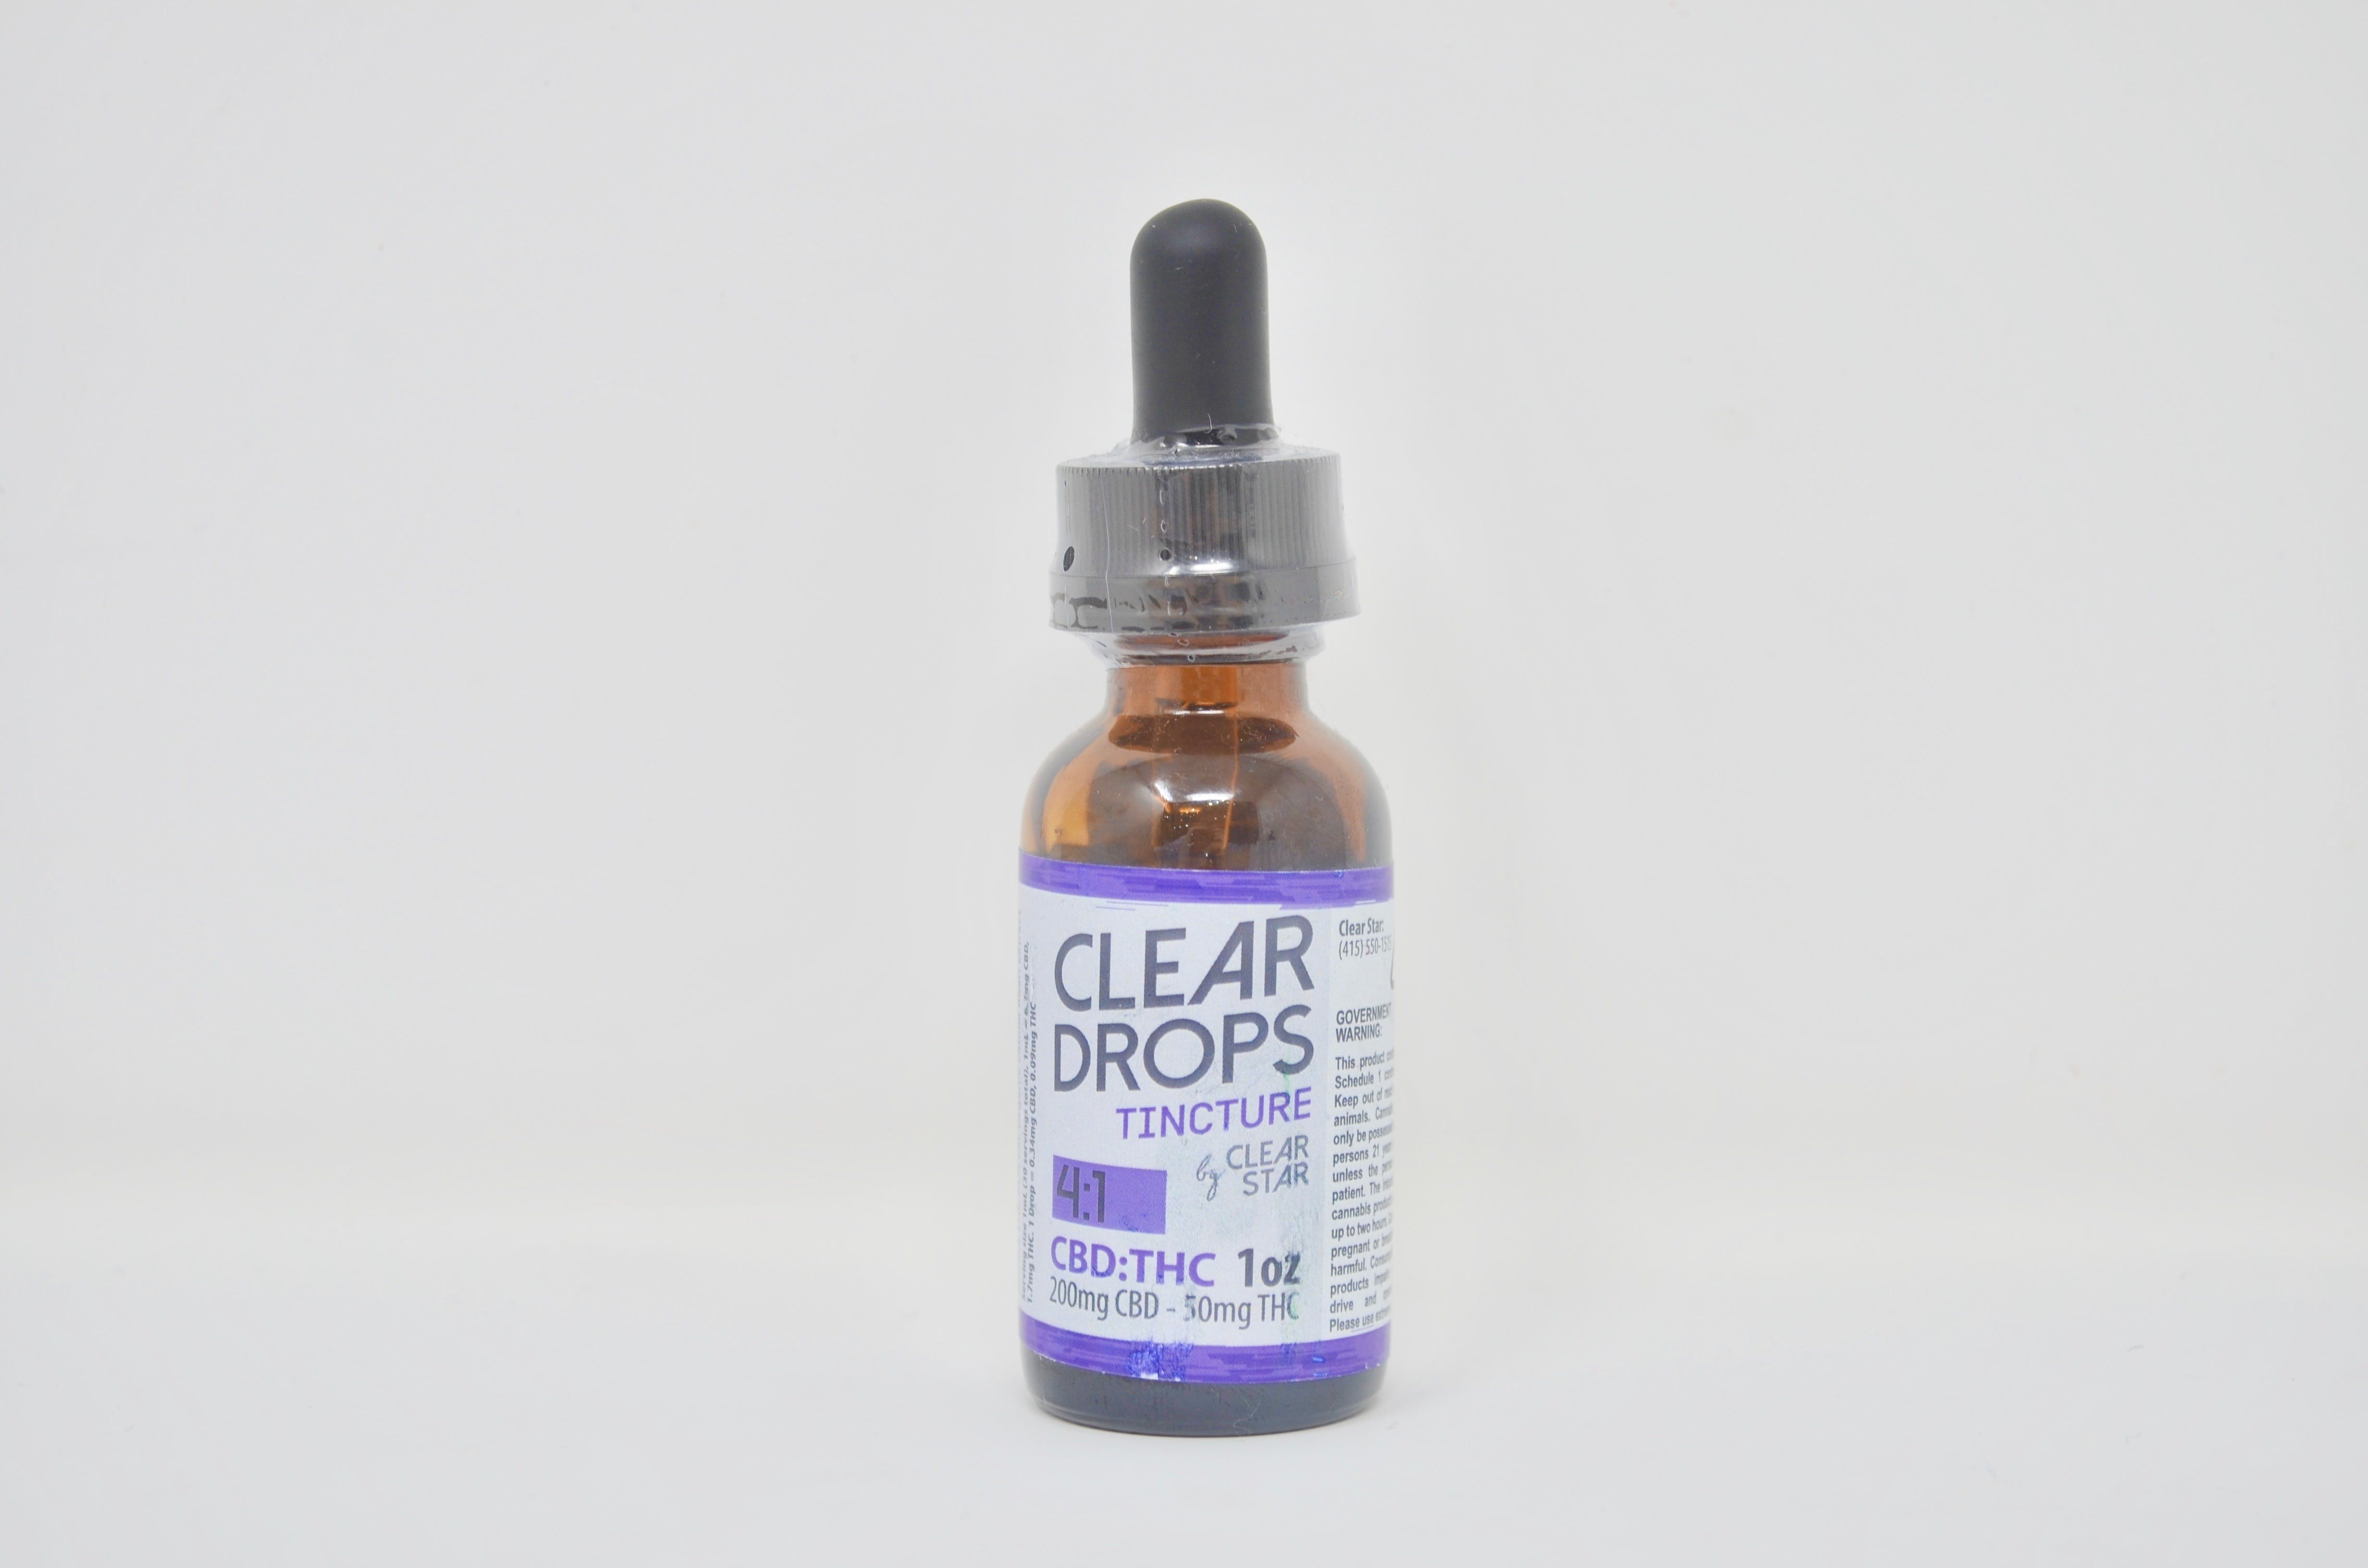 tincture-clear-drops-by-clear-star-41-cbd-tincture-1oz